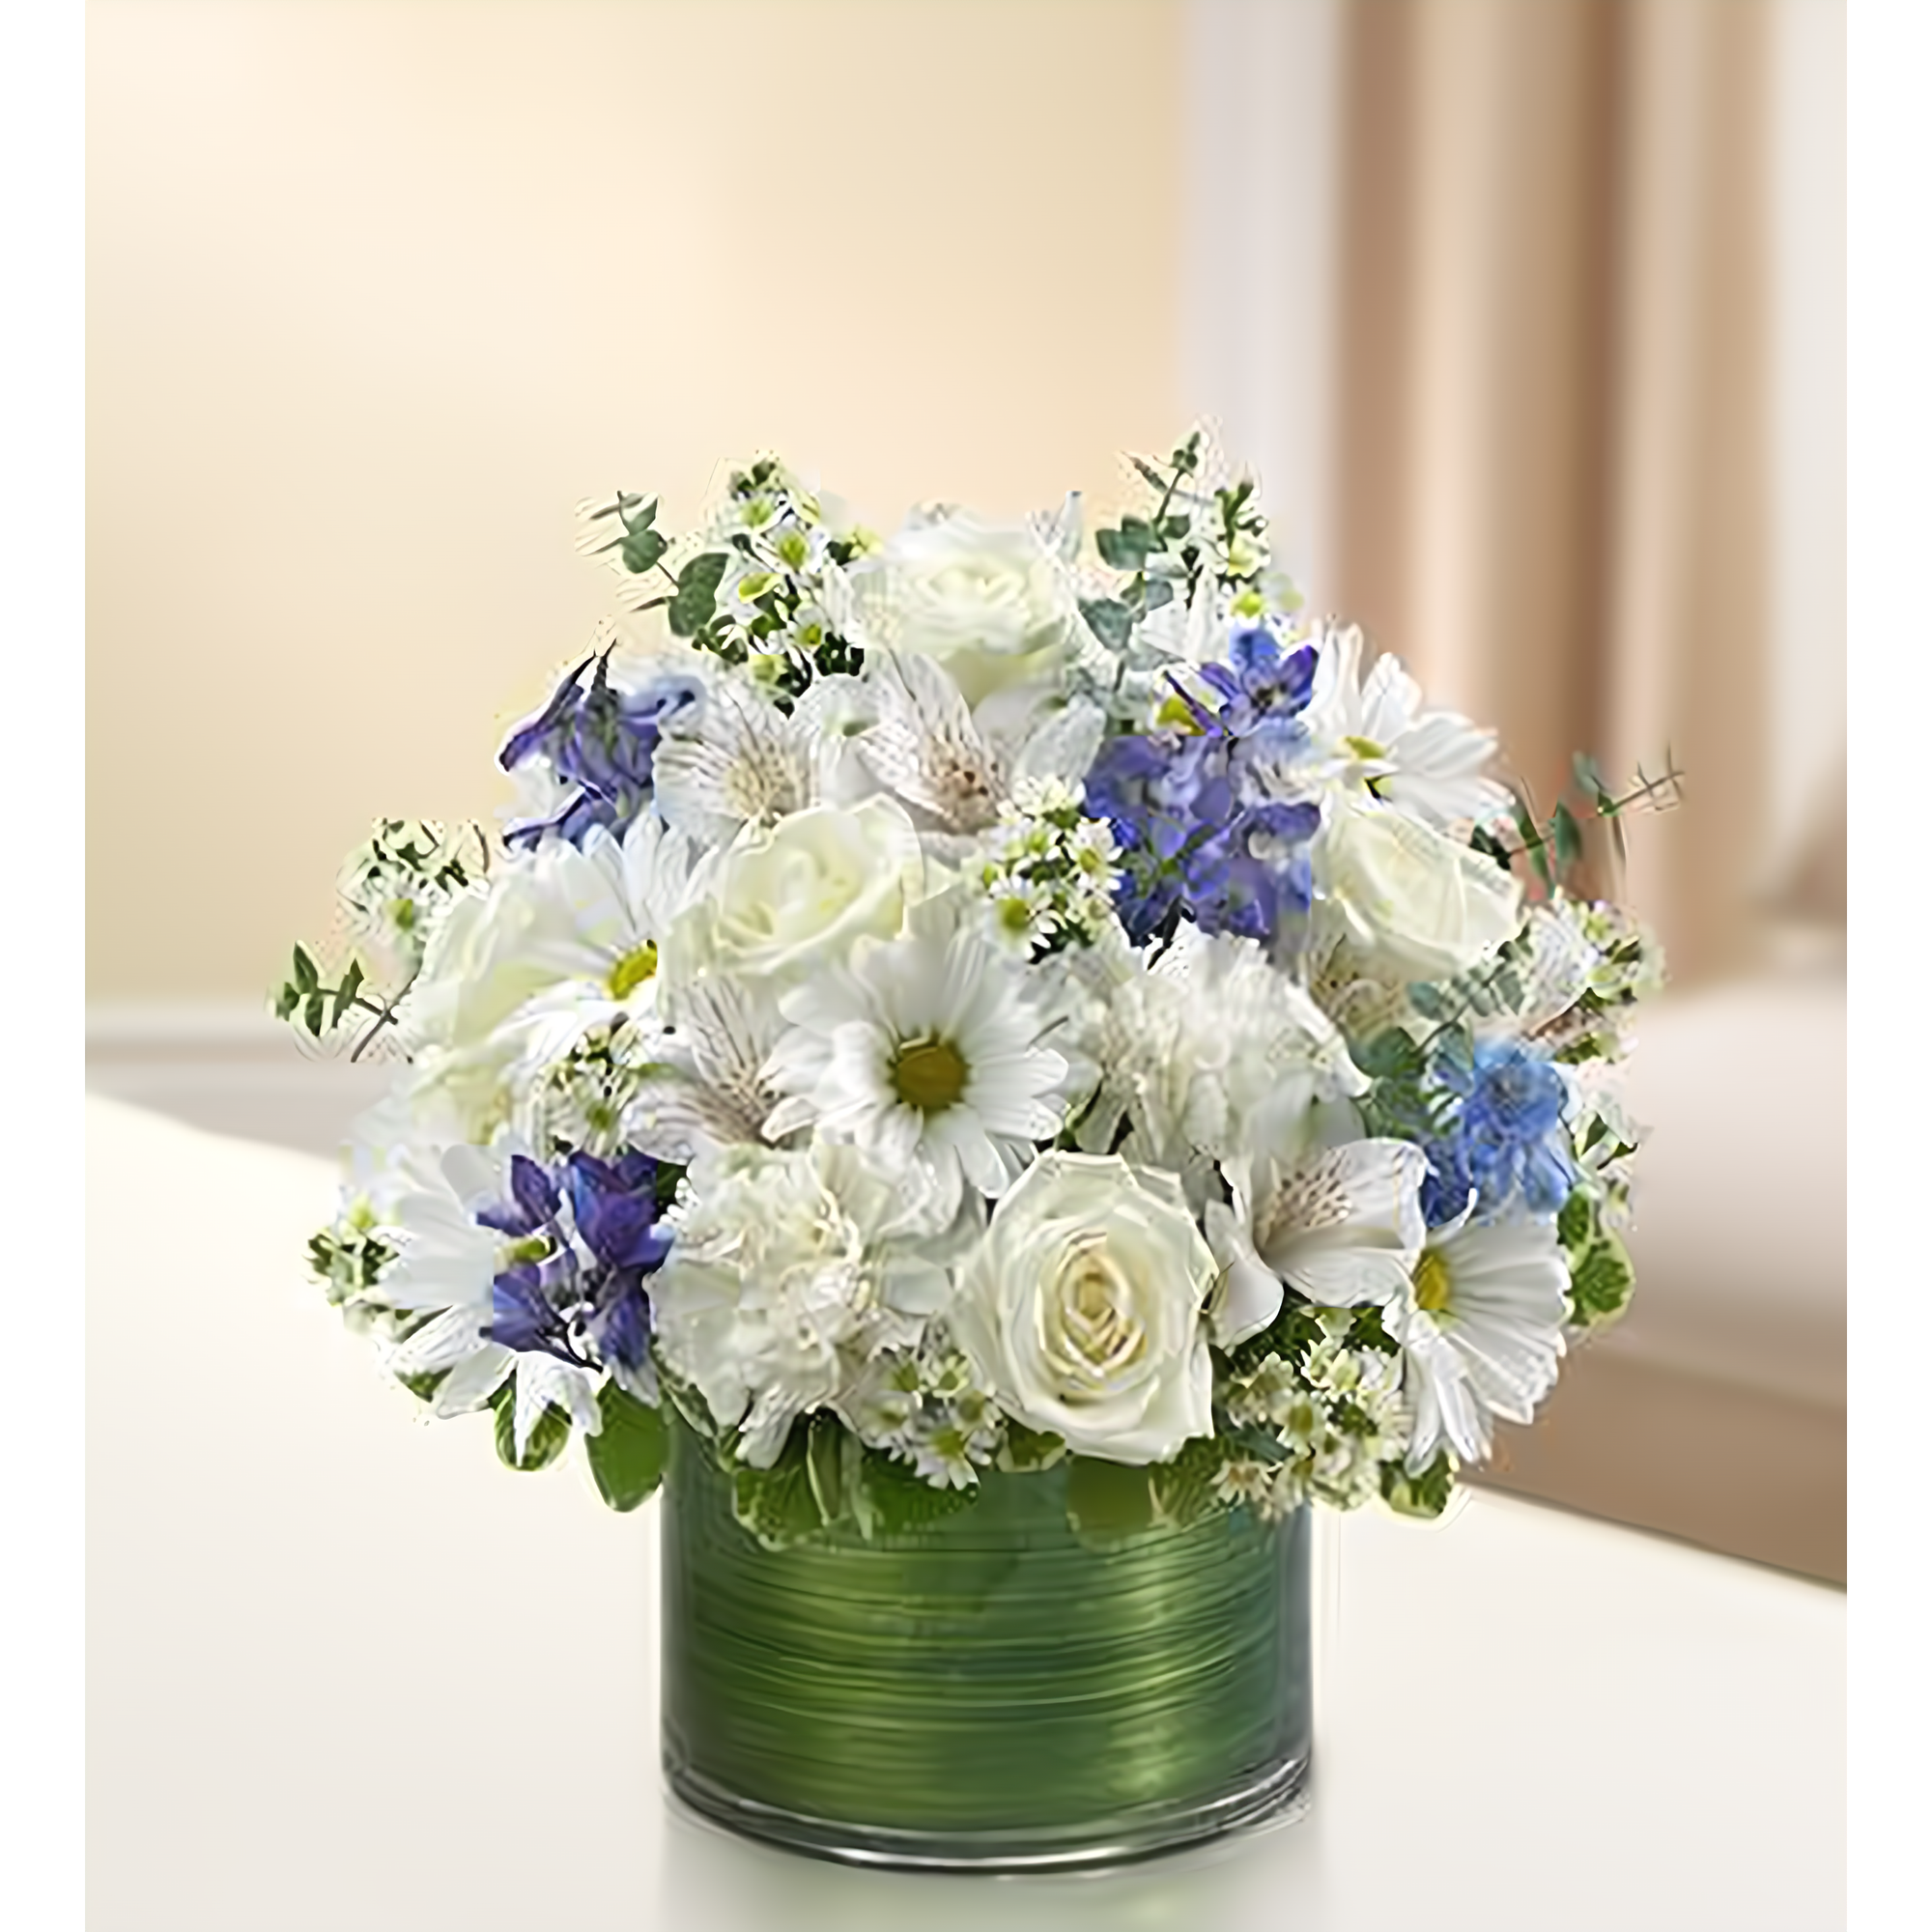 NYC Flower Delivery - Cherished Memories - Blue and White - Seasonal > Hanukkah